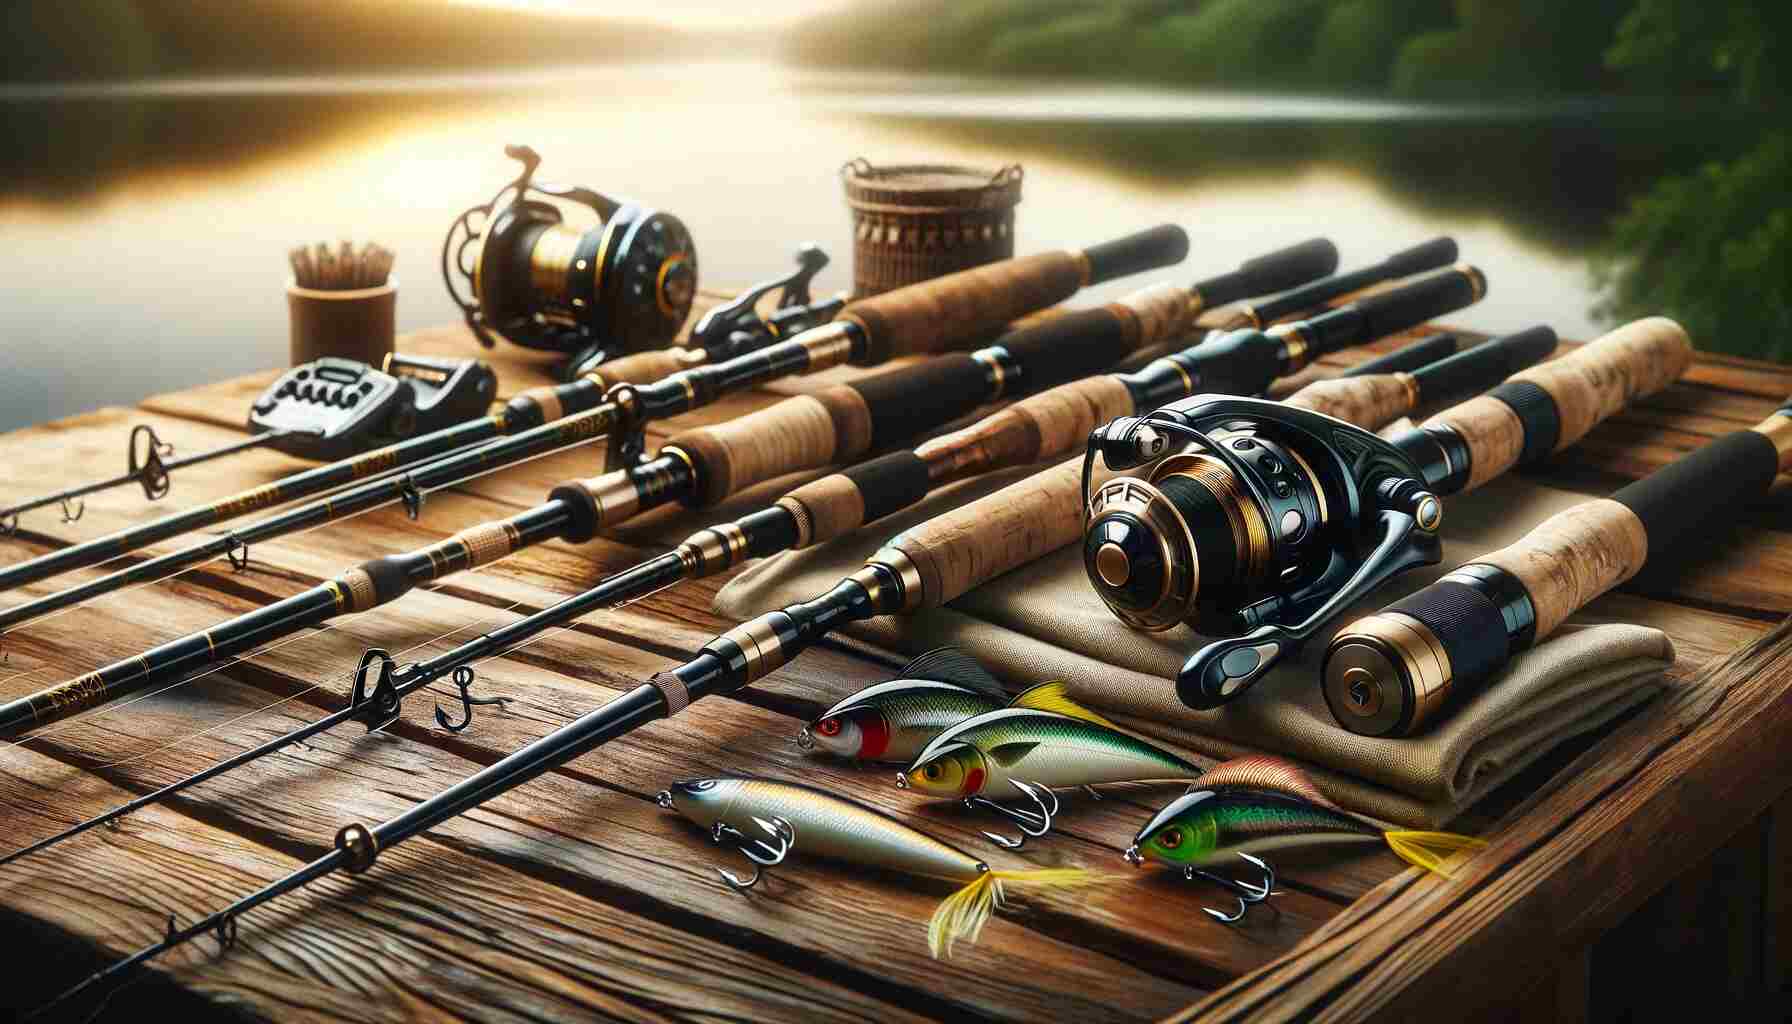 An elegant display of premium fishing gear, including high-end fishing rods, reels, and lures, set on a wooden surface with a serene outdoor background, hinting at a lake or river setting.